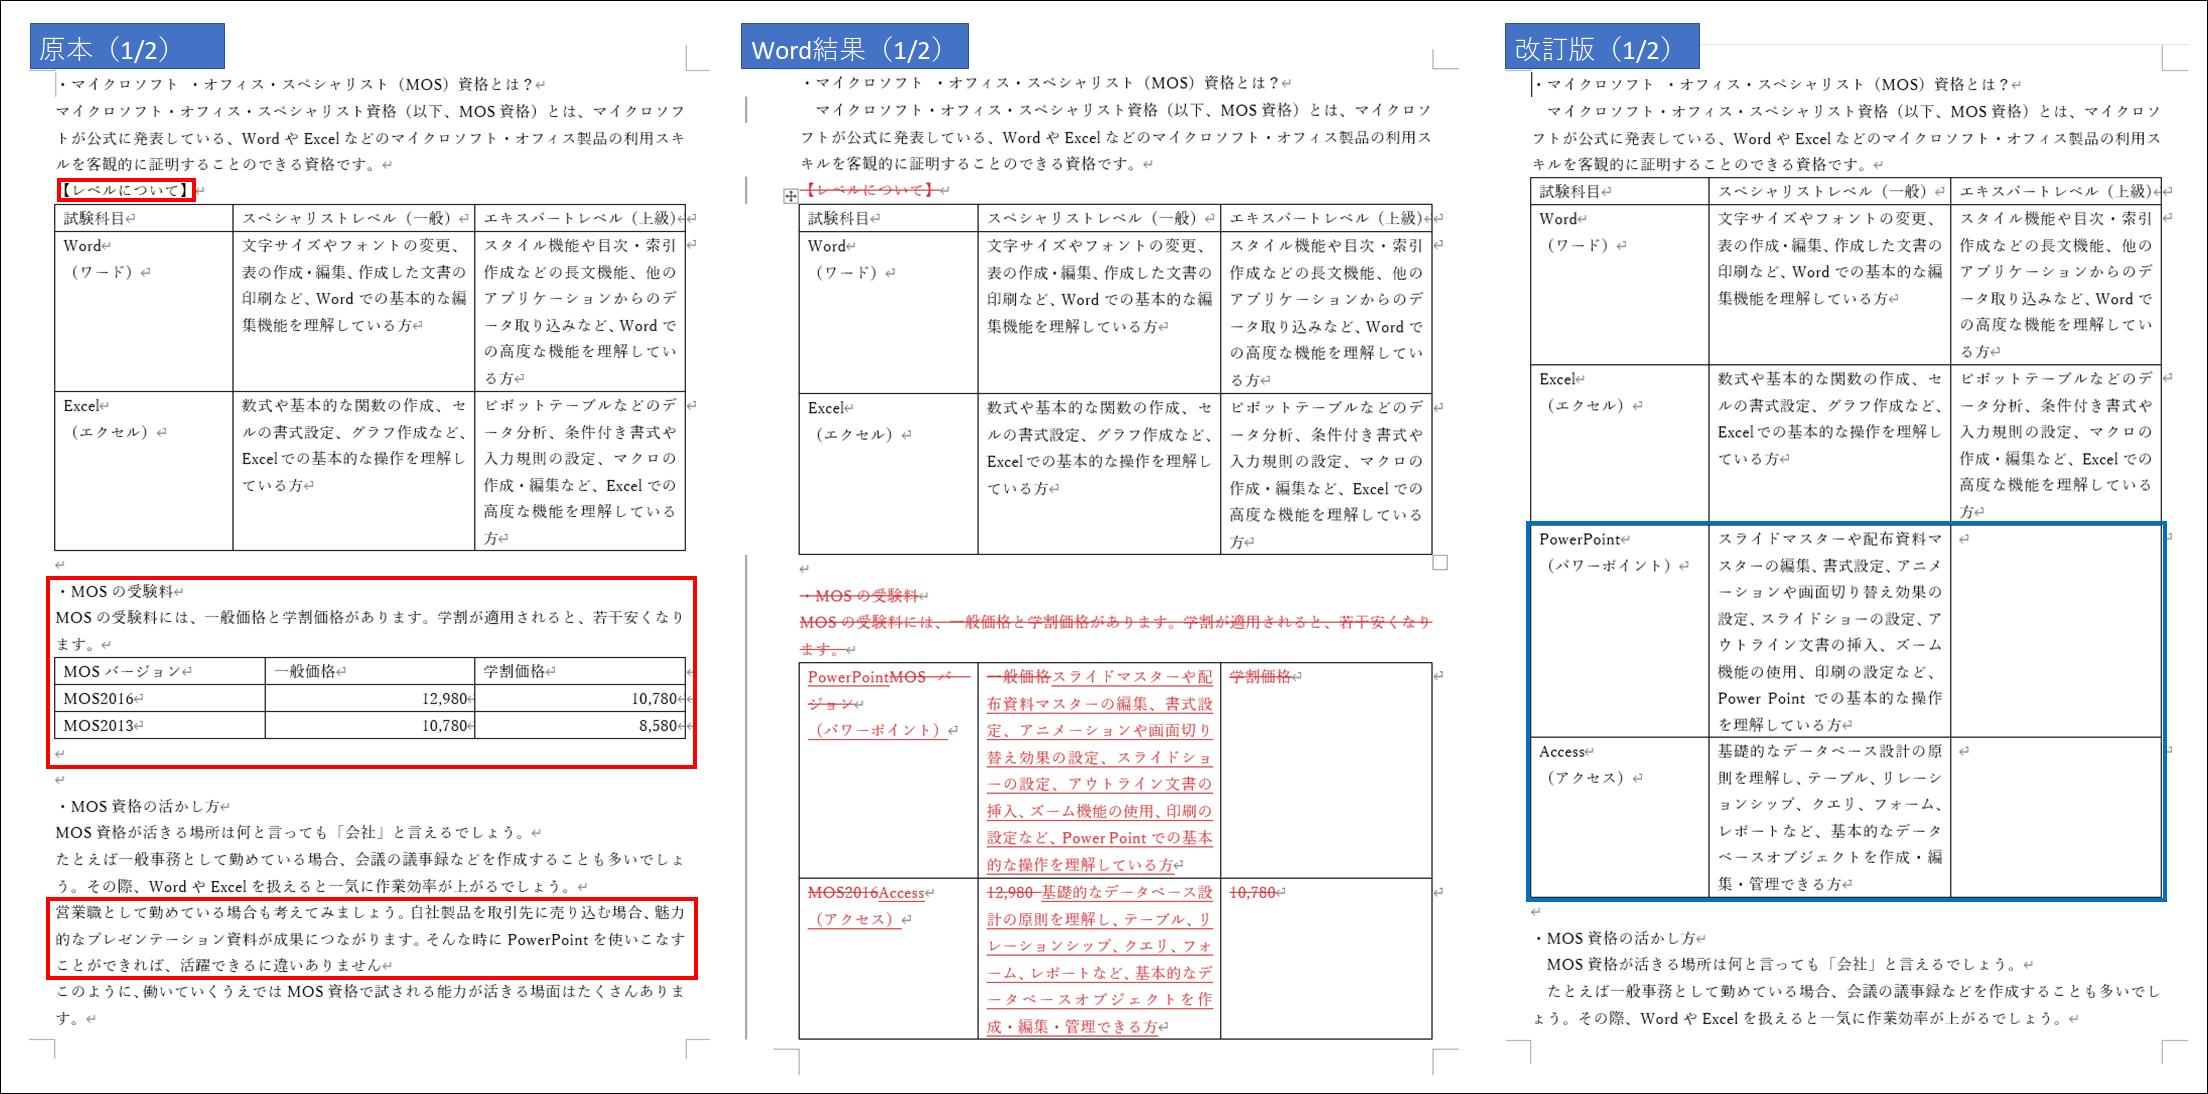 Compare documents by Microsoft Word Results1 Image